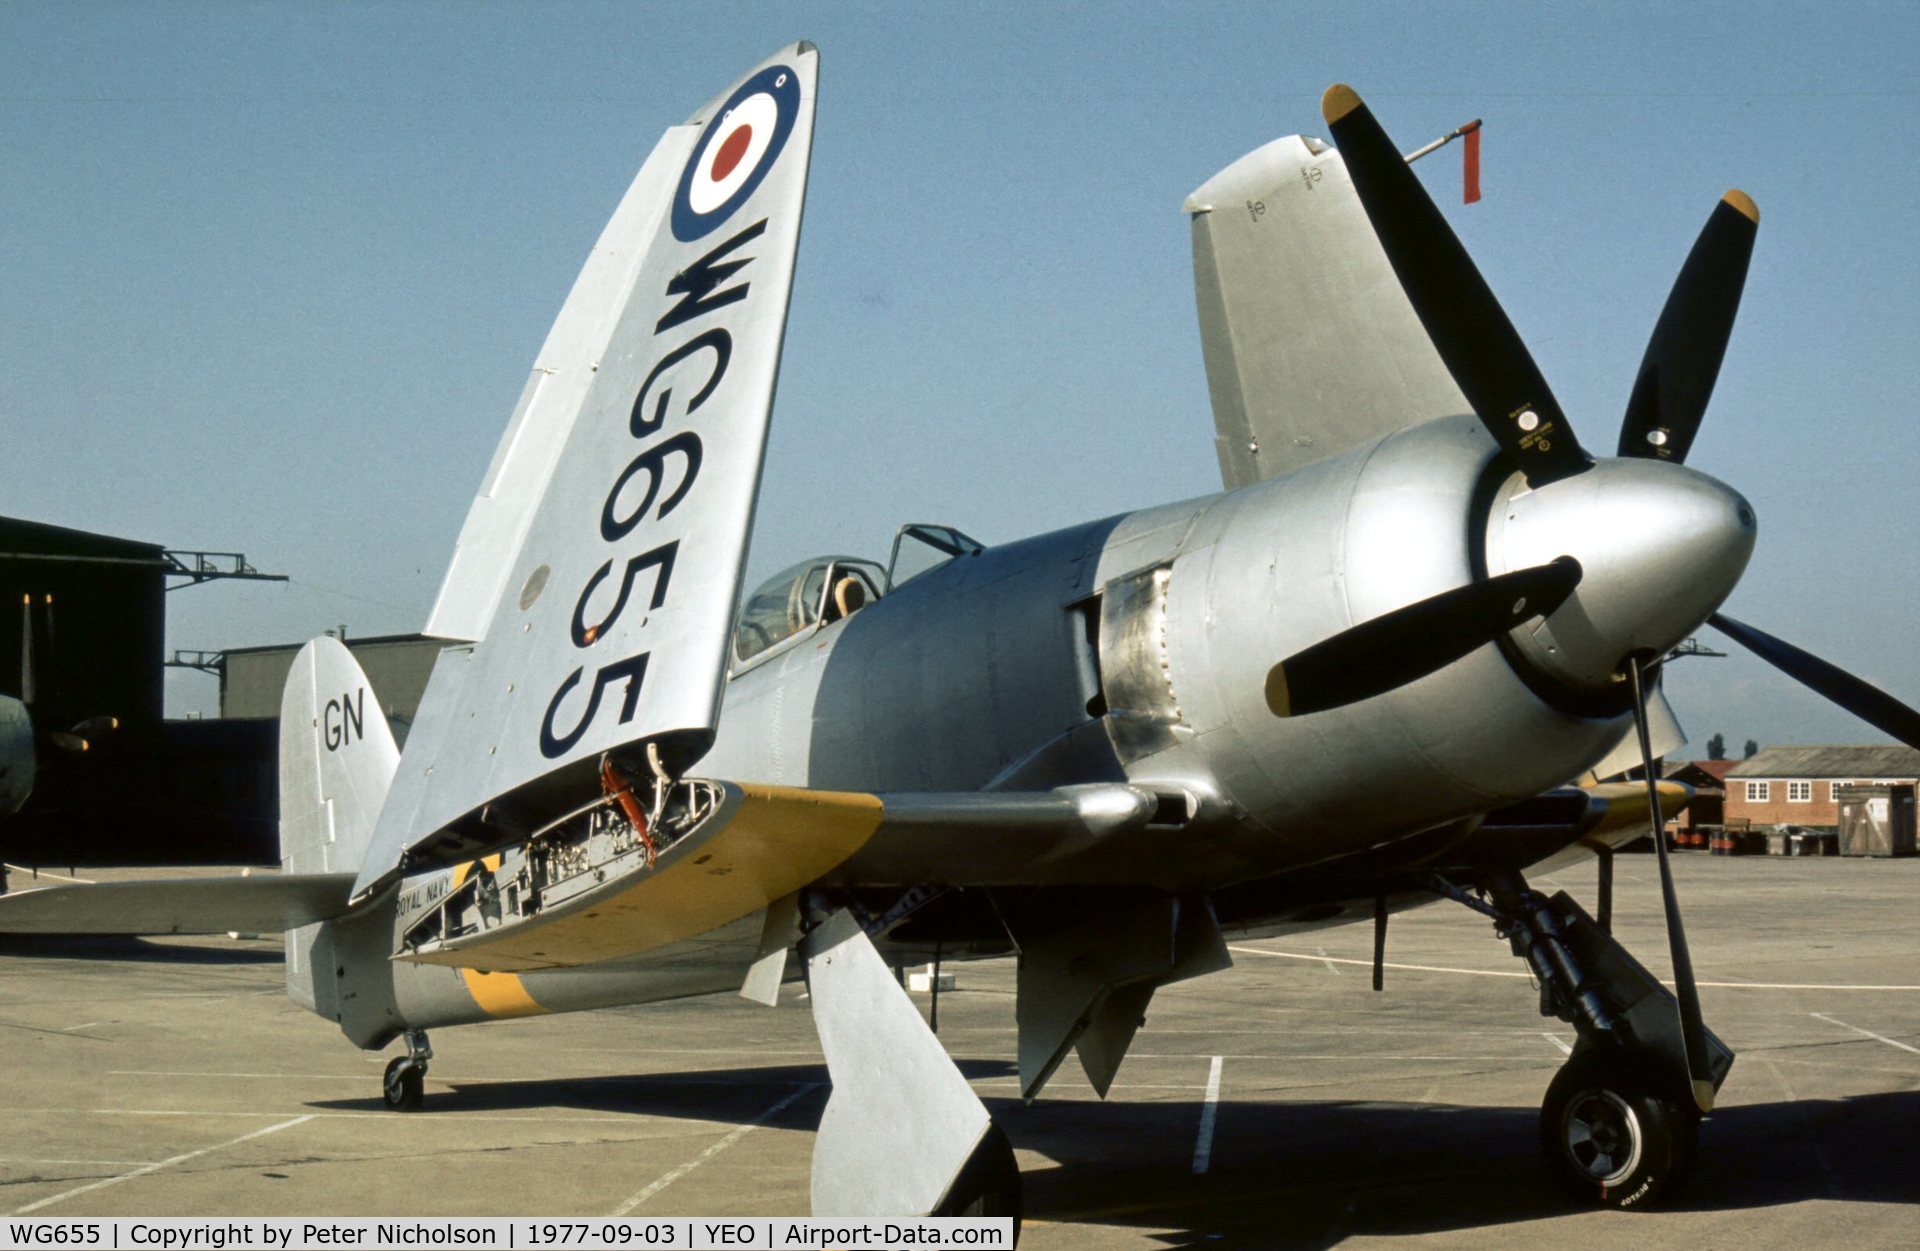 WG655, 1952 Hawker Sea Fury T.20 C/N 41H/636070, In for repaint at the 1976 Air Day, the Royal Navy Historic Flight Sea Fury T.20 at the 1977 RNAS Yeovilton Air Day wore new markings.